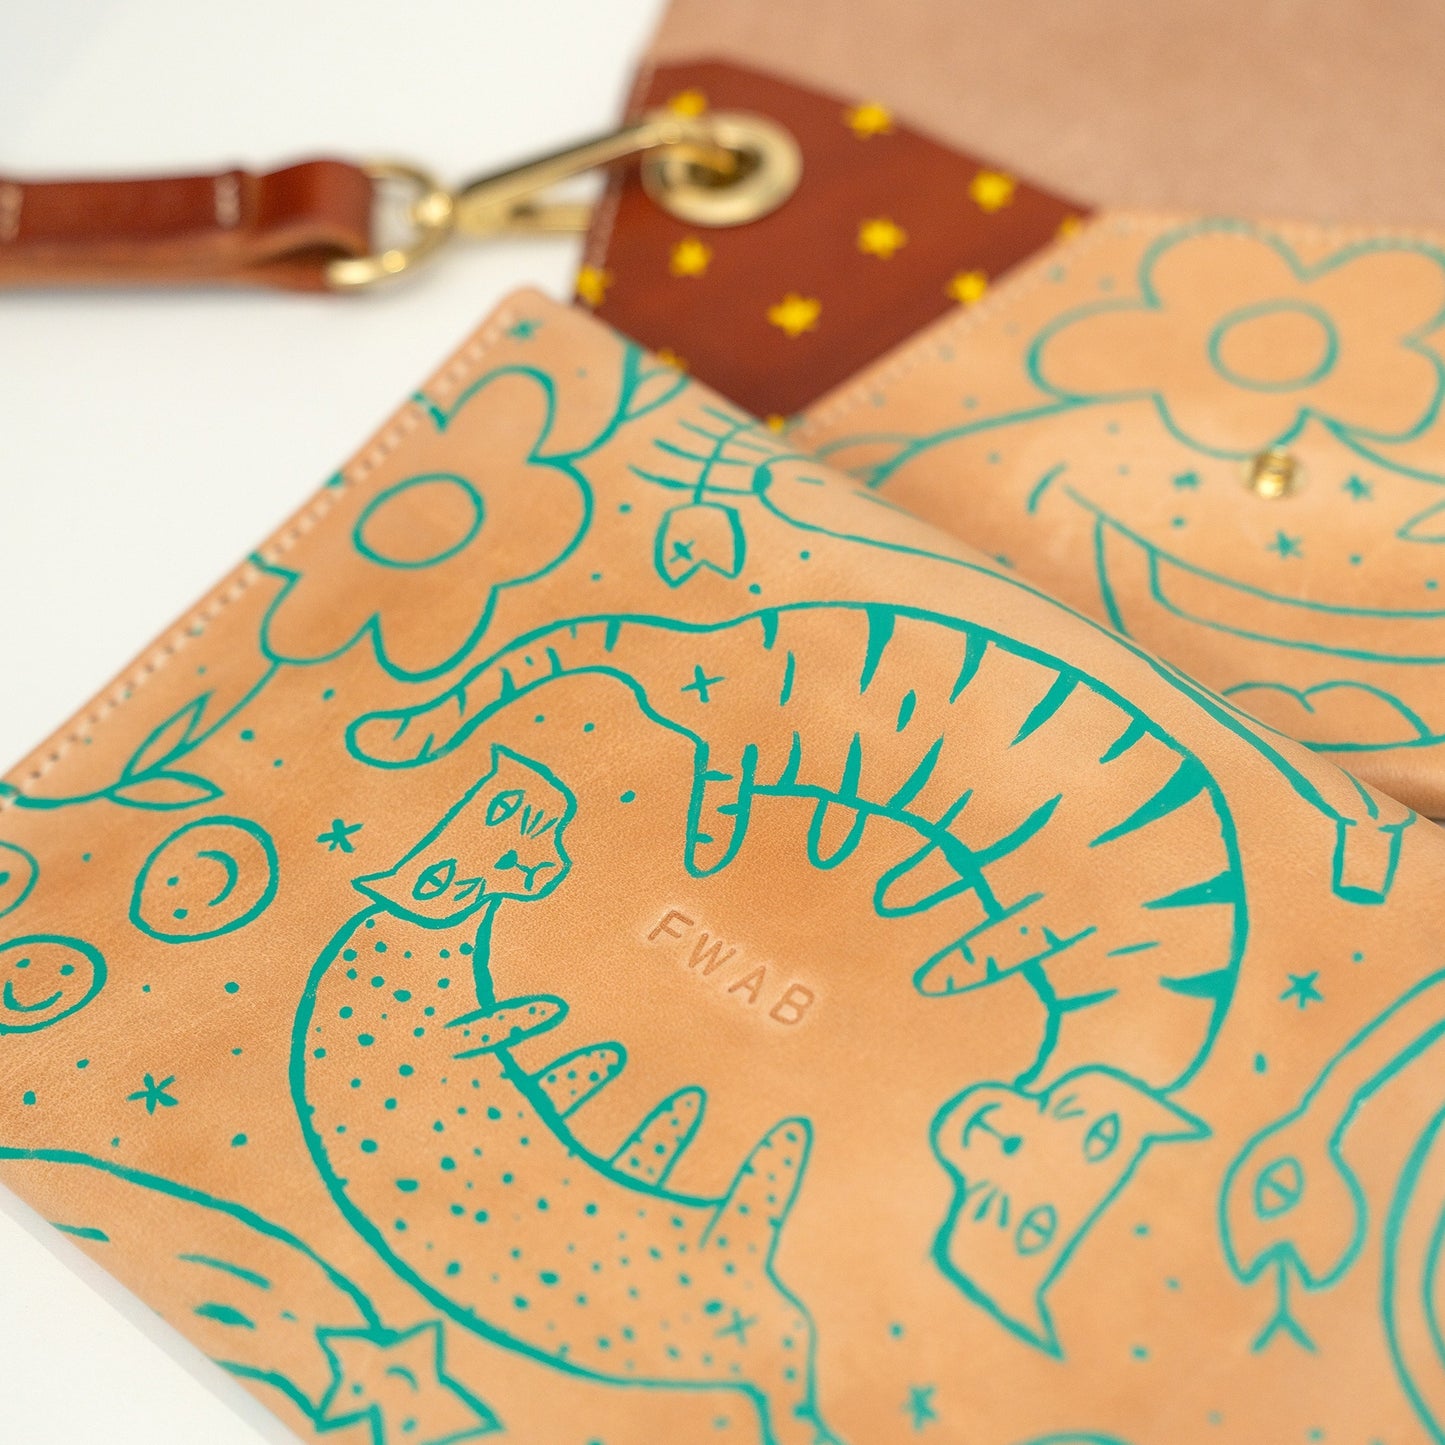 Doodles #1 - Handmade Leather Clutch